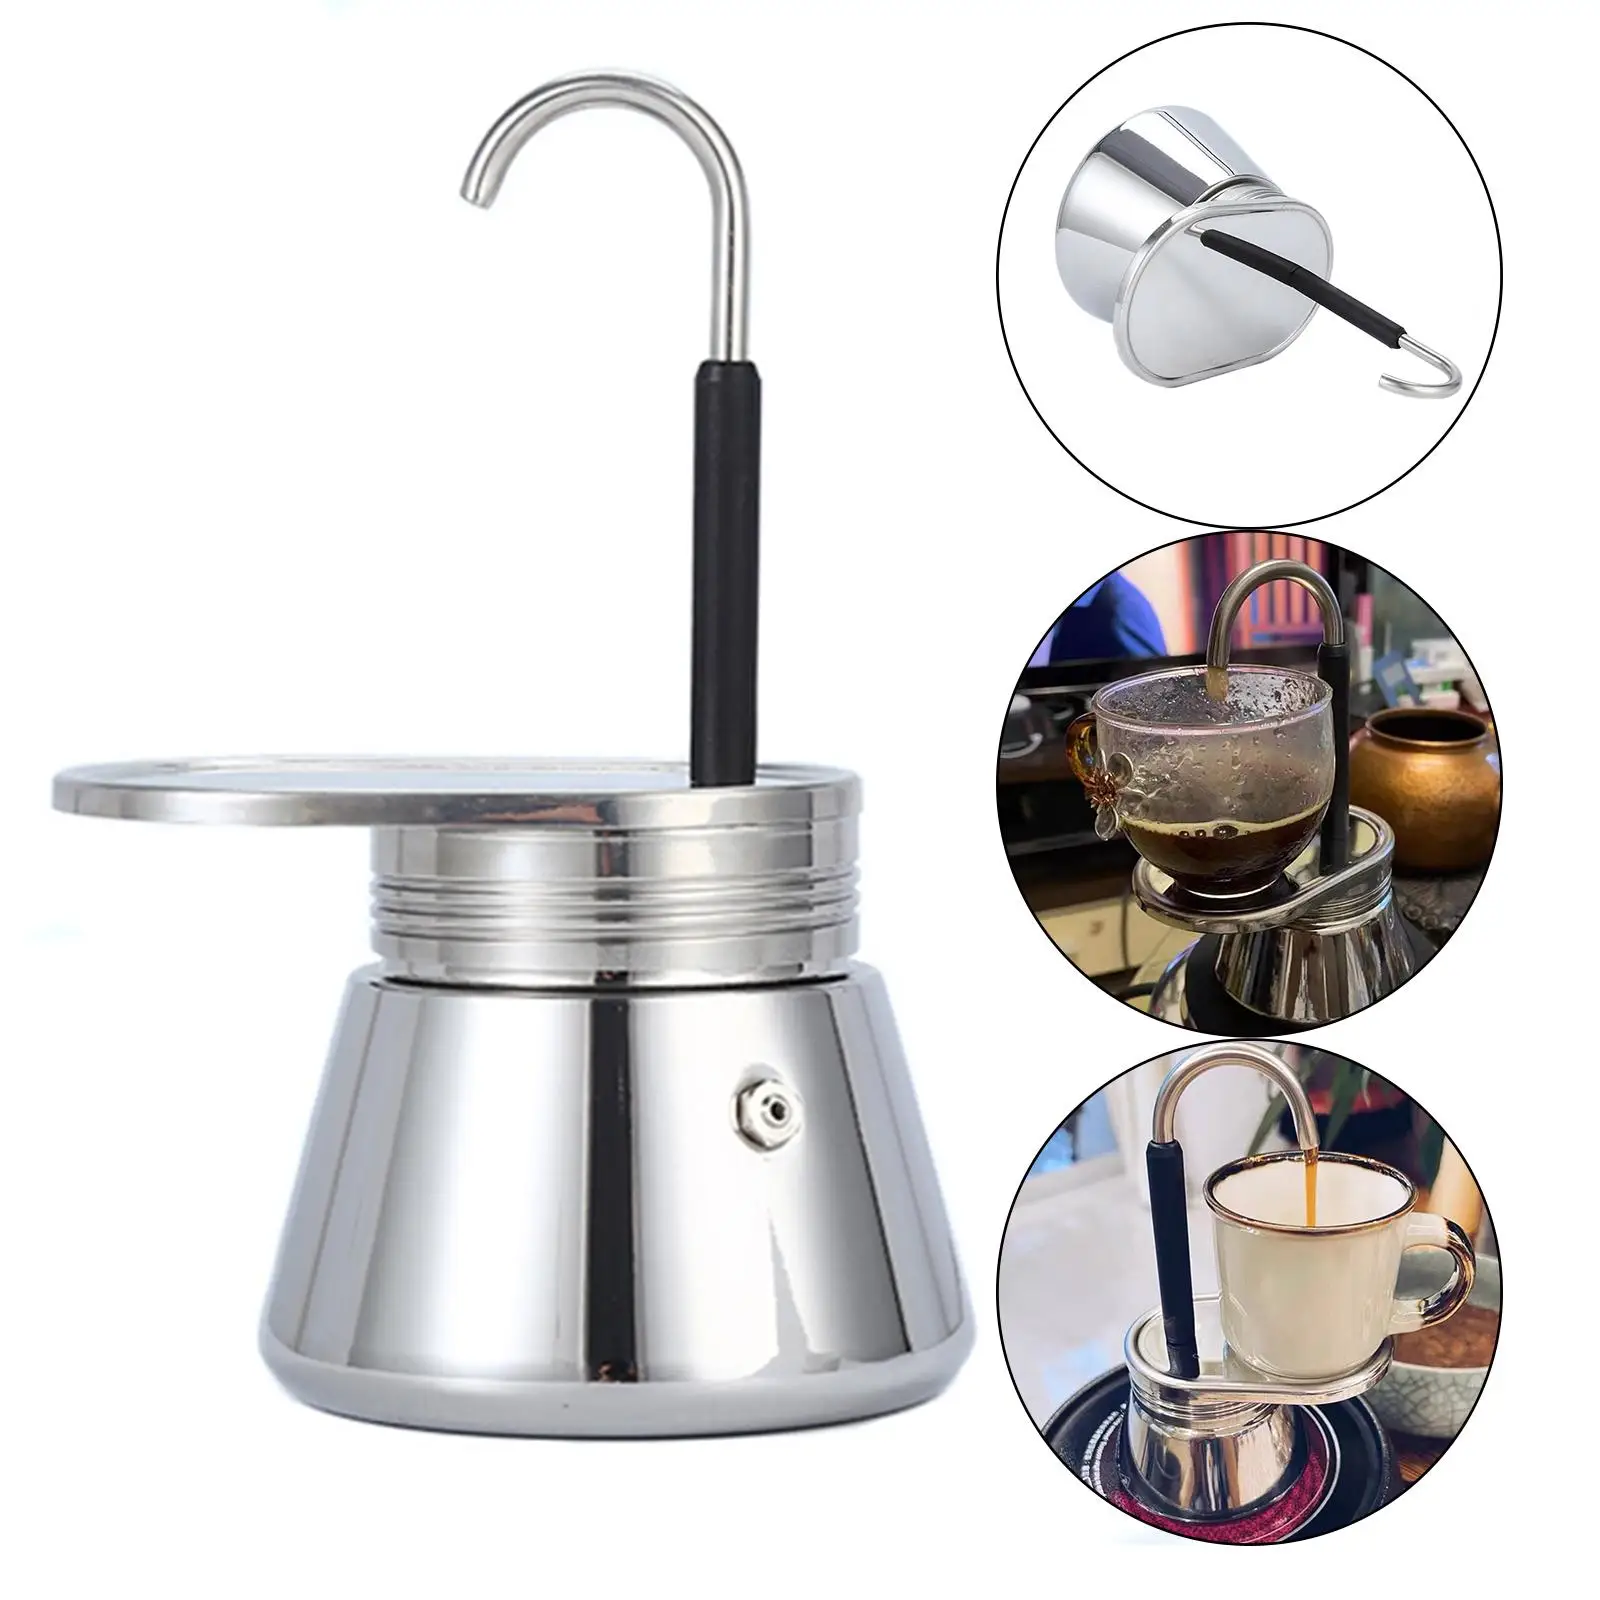 Stovetop Coffee Percolator  Stainless Steel,  Kettle Outdoor with Long Spout Silver  Operate Coffee Making DIY